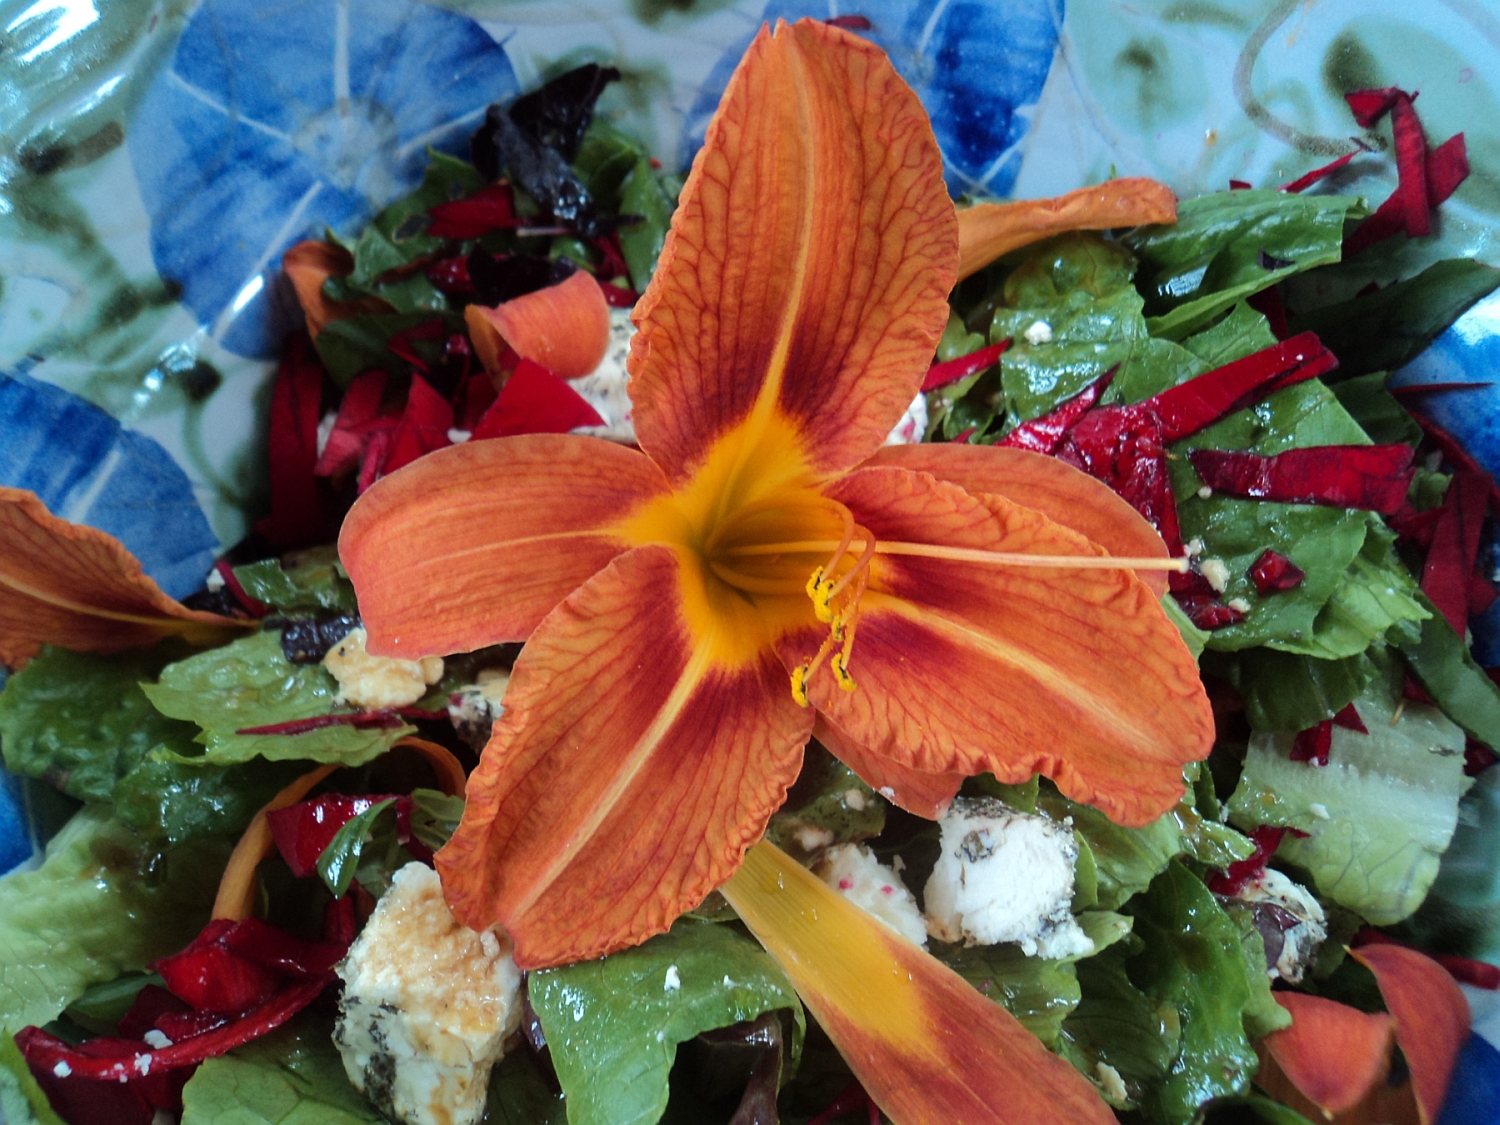 In Season Now: Day Lilies and Begonias